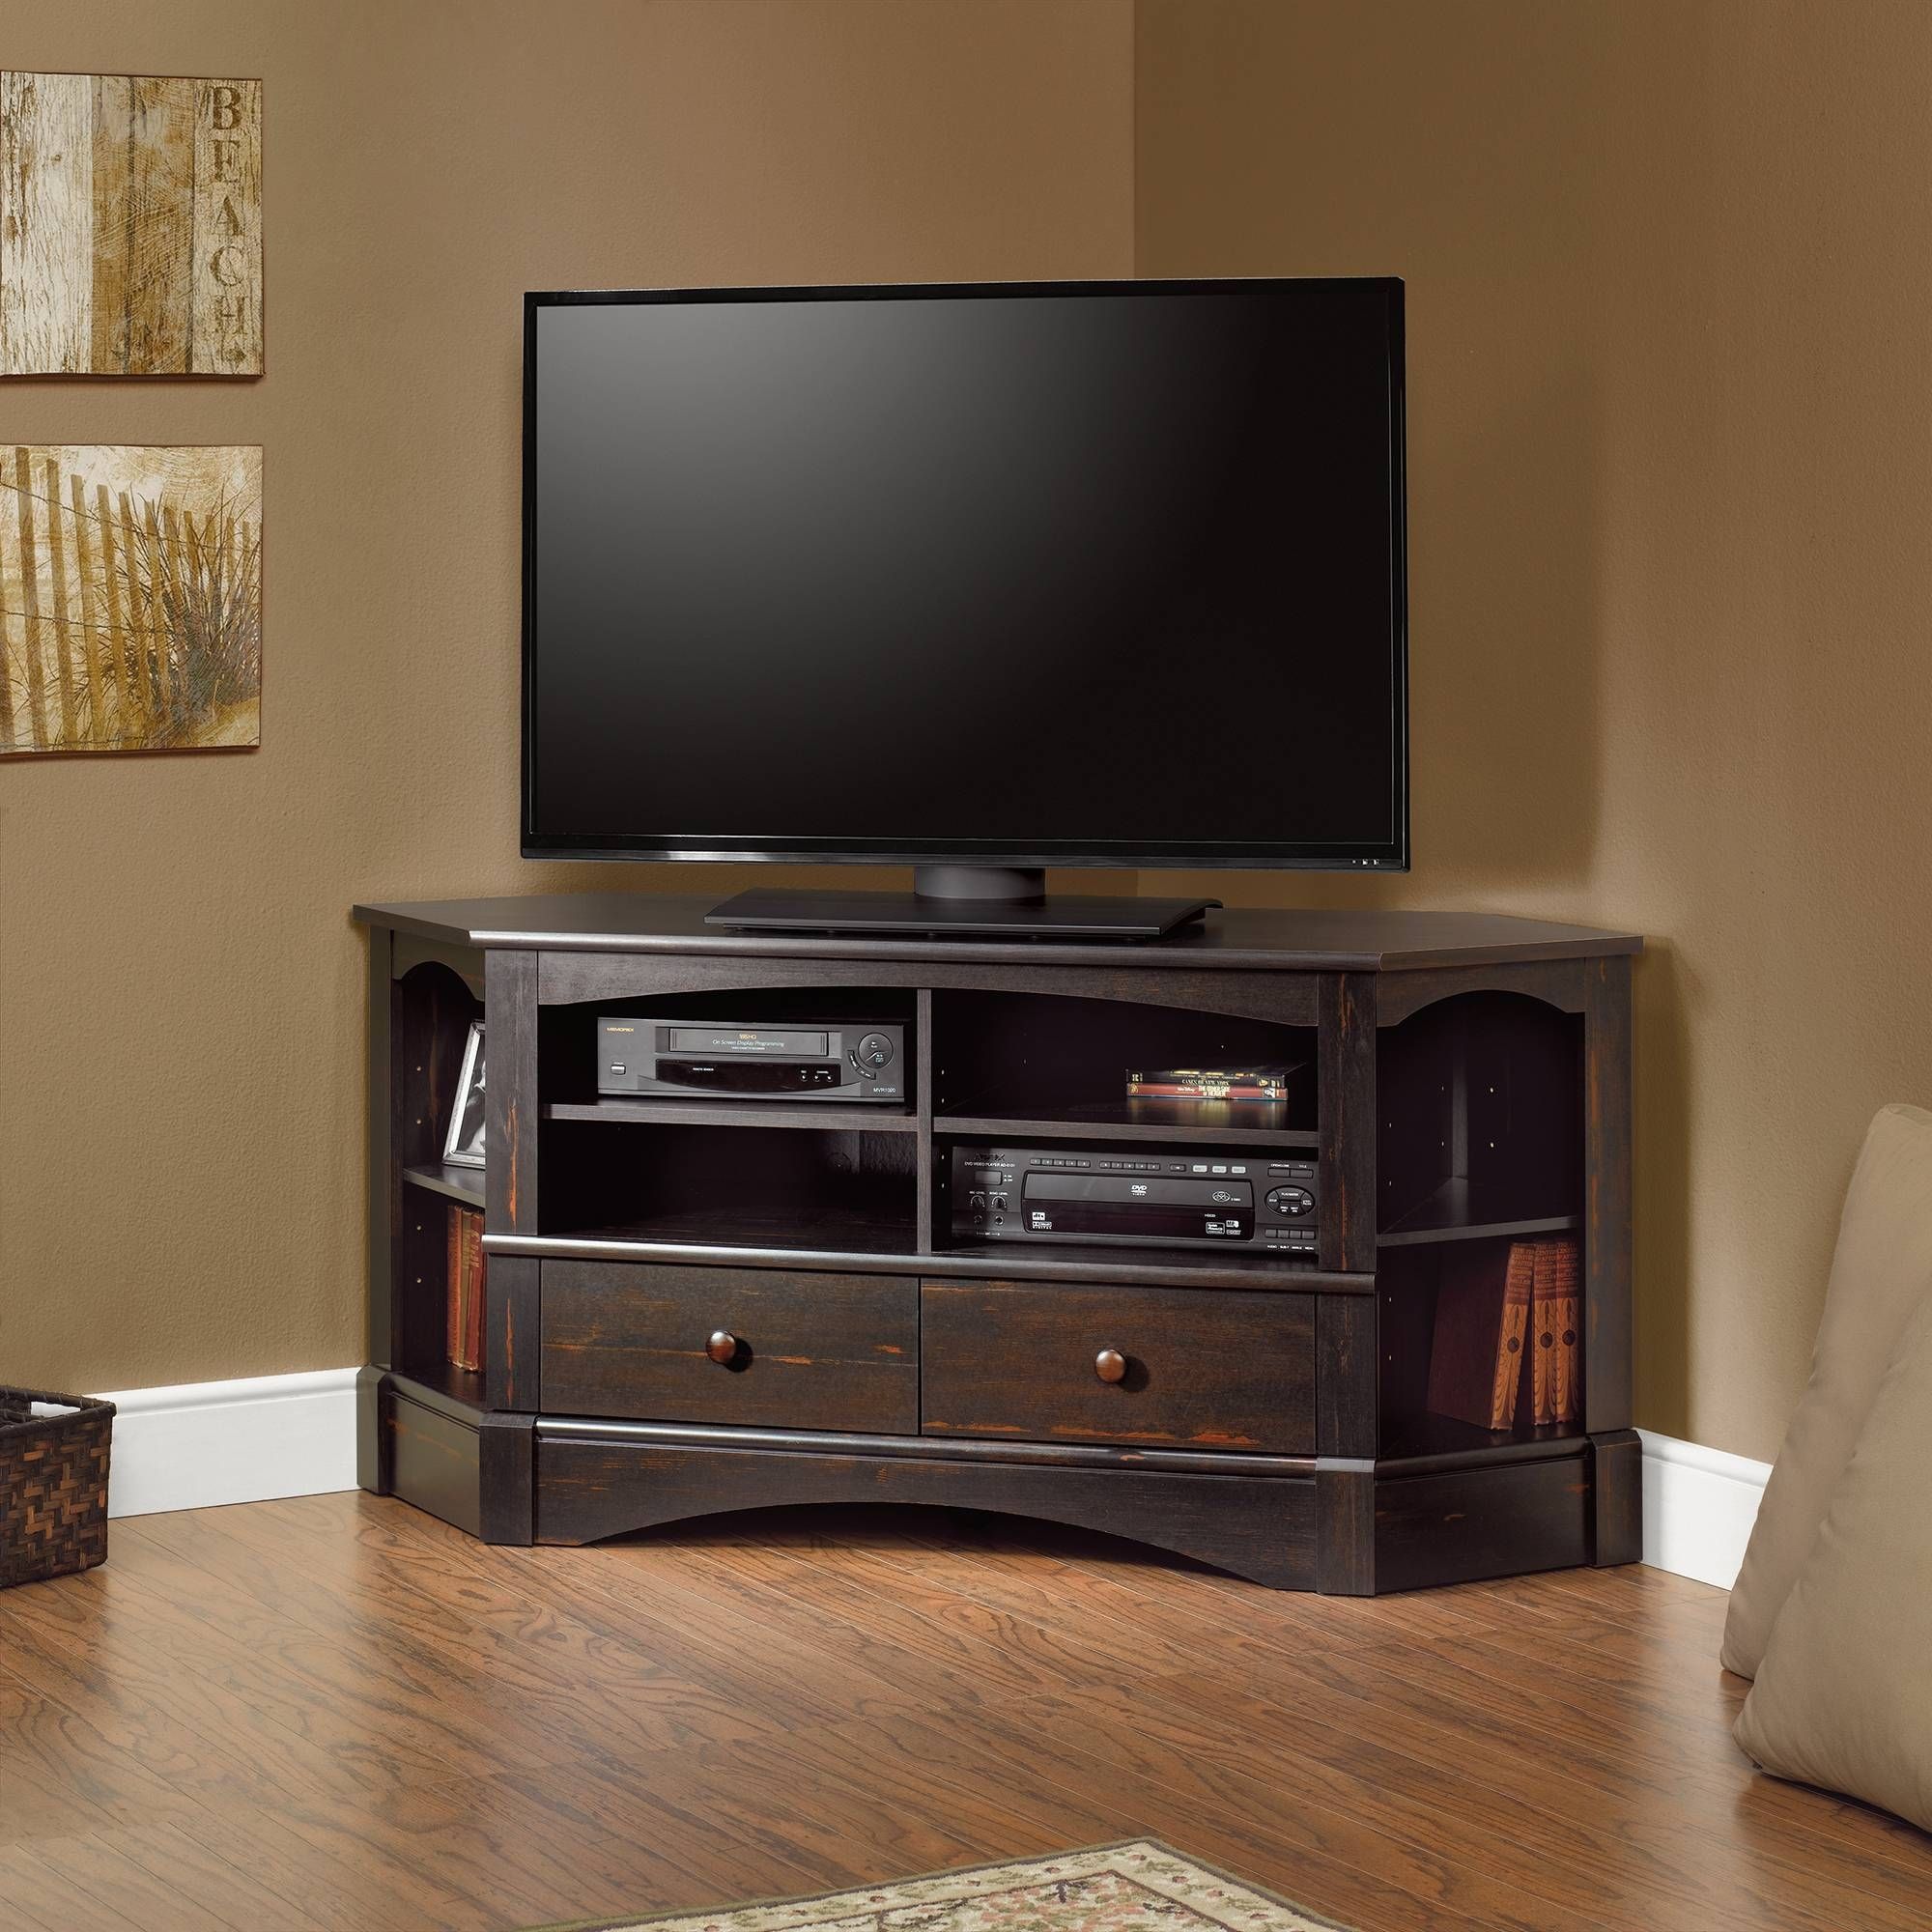 Small Wooden Corner Tv Stand Console Cabinet With Fireplace Pertaining To Tv Stands For Corner (View 8 of 15)